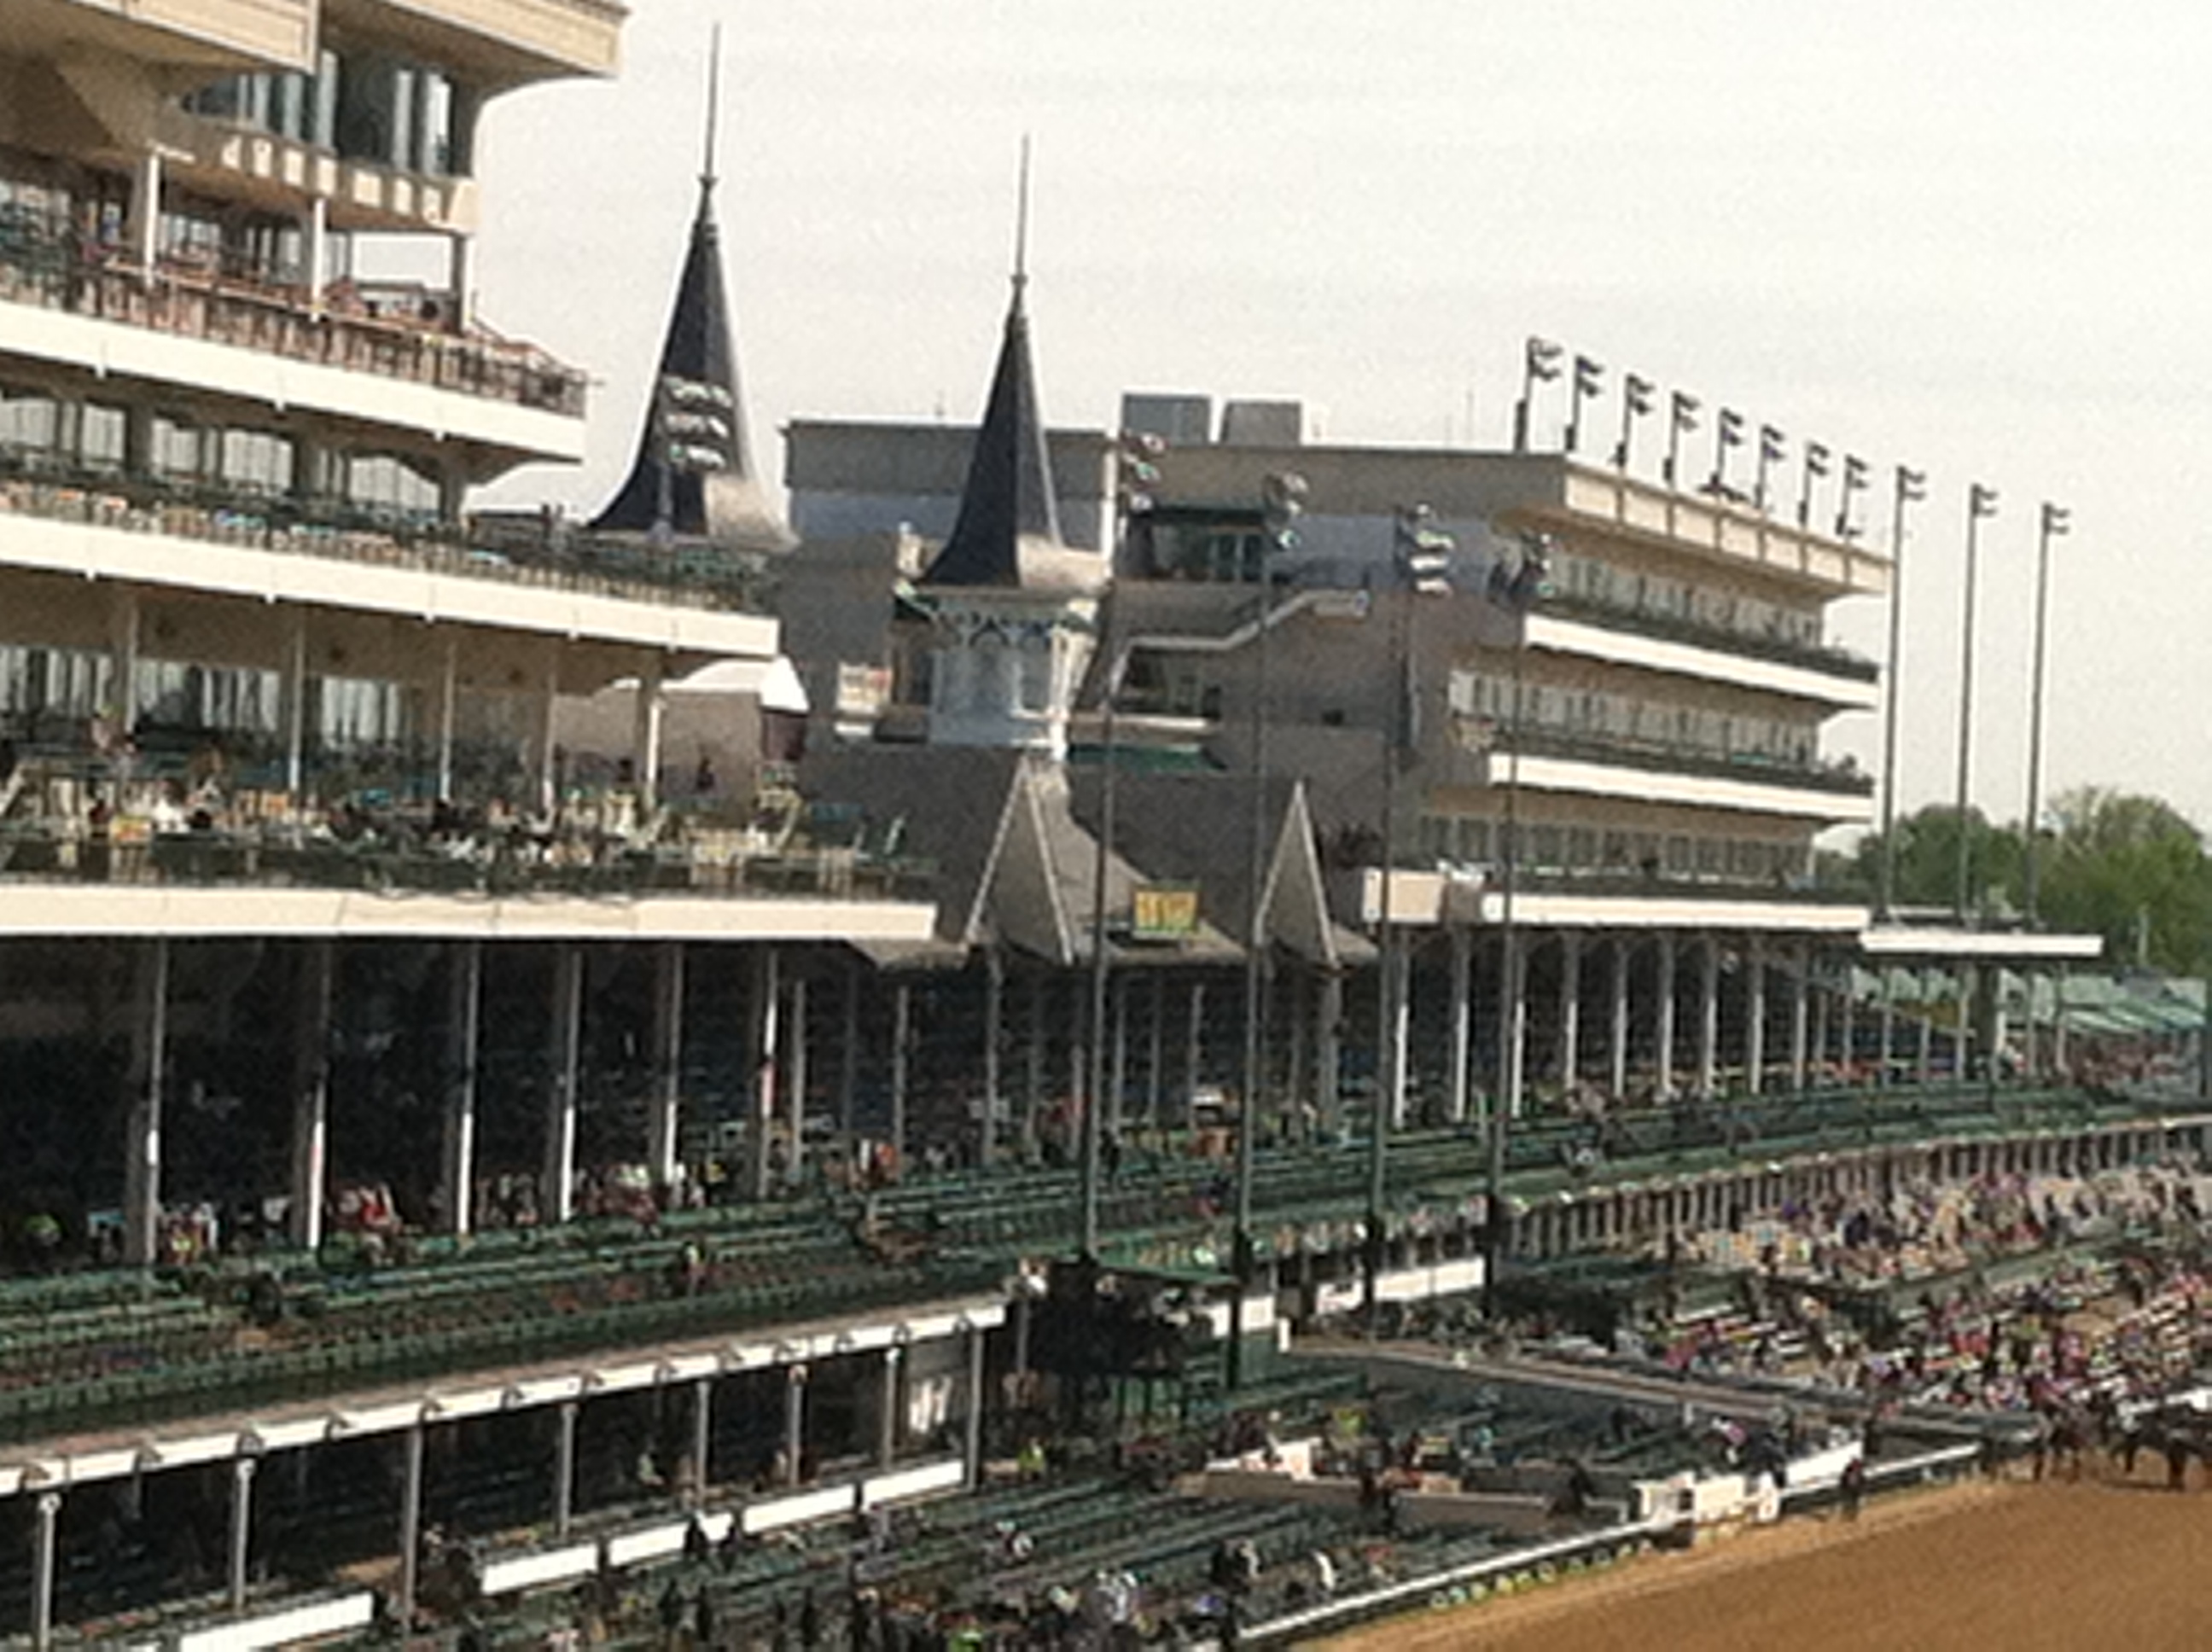 A Day at the Kentucky Derby With Robin Robinett